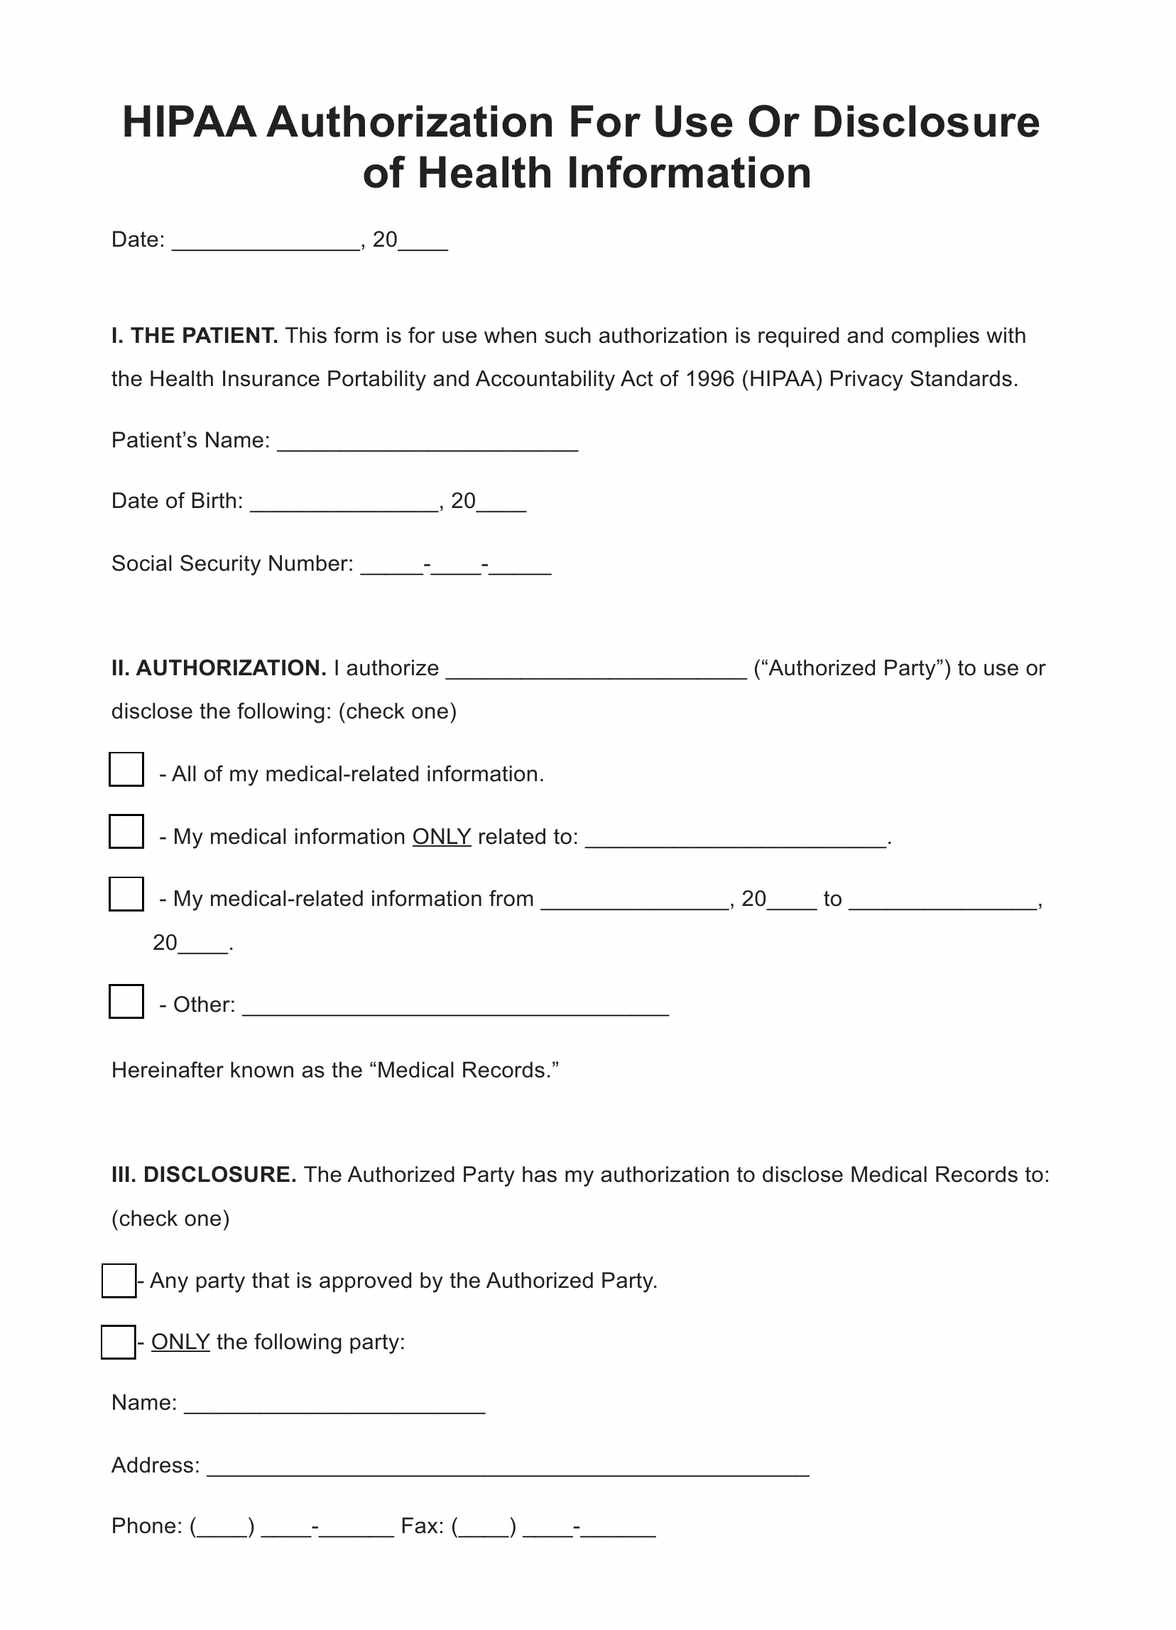 HIPAA Medical Release Form PDF Example